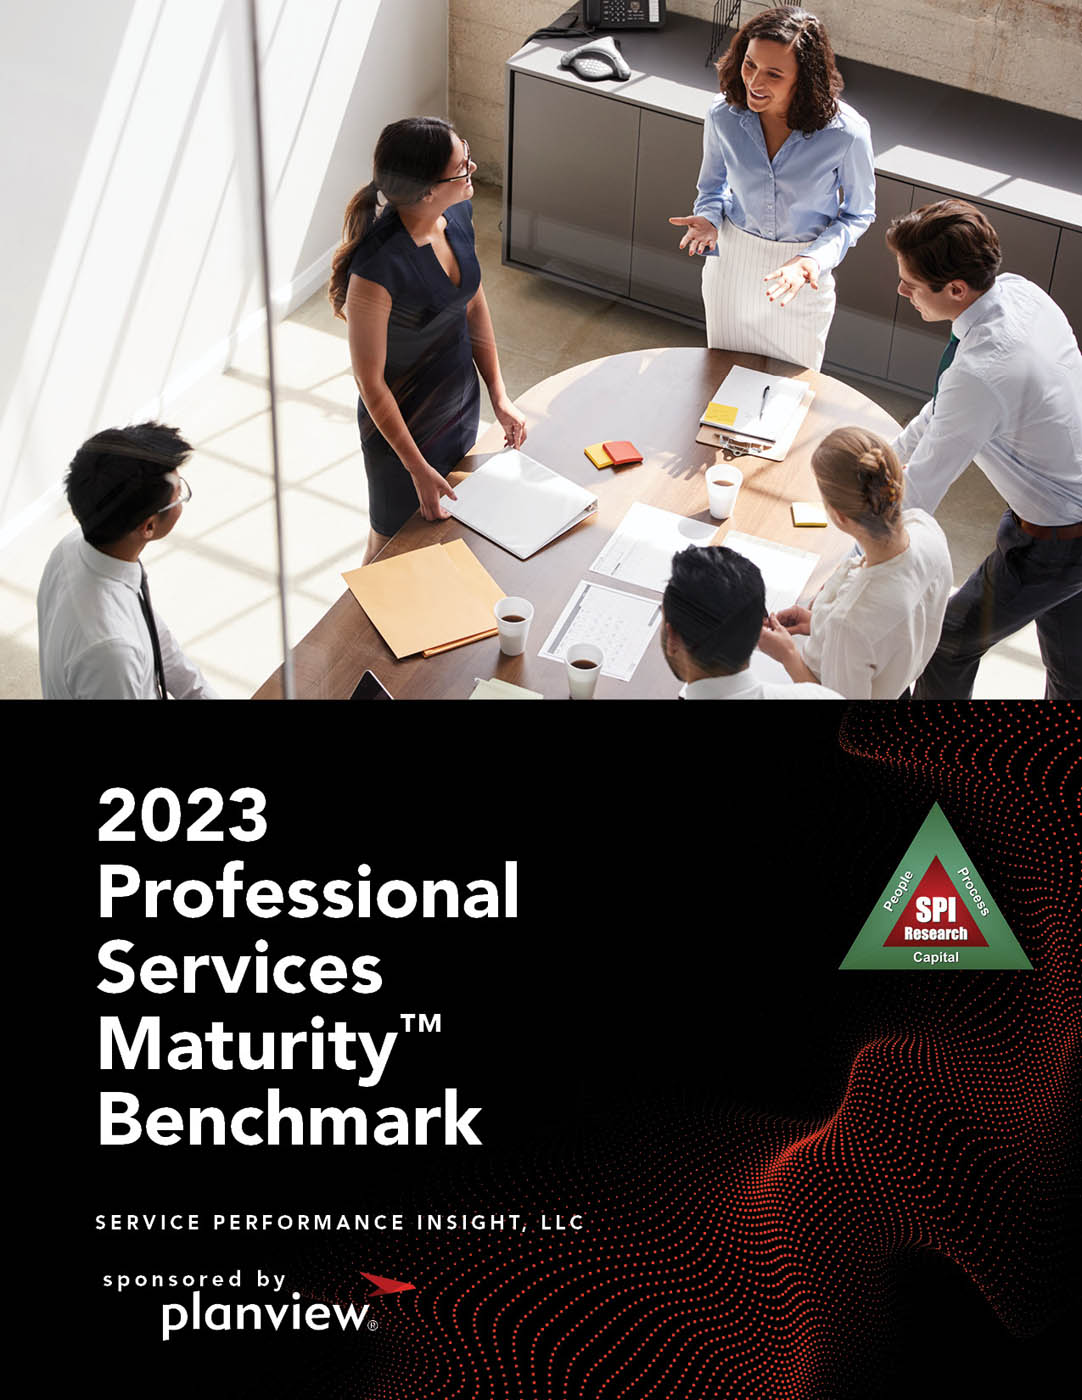 2023 Professional Services Benchmarking Report